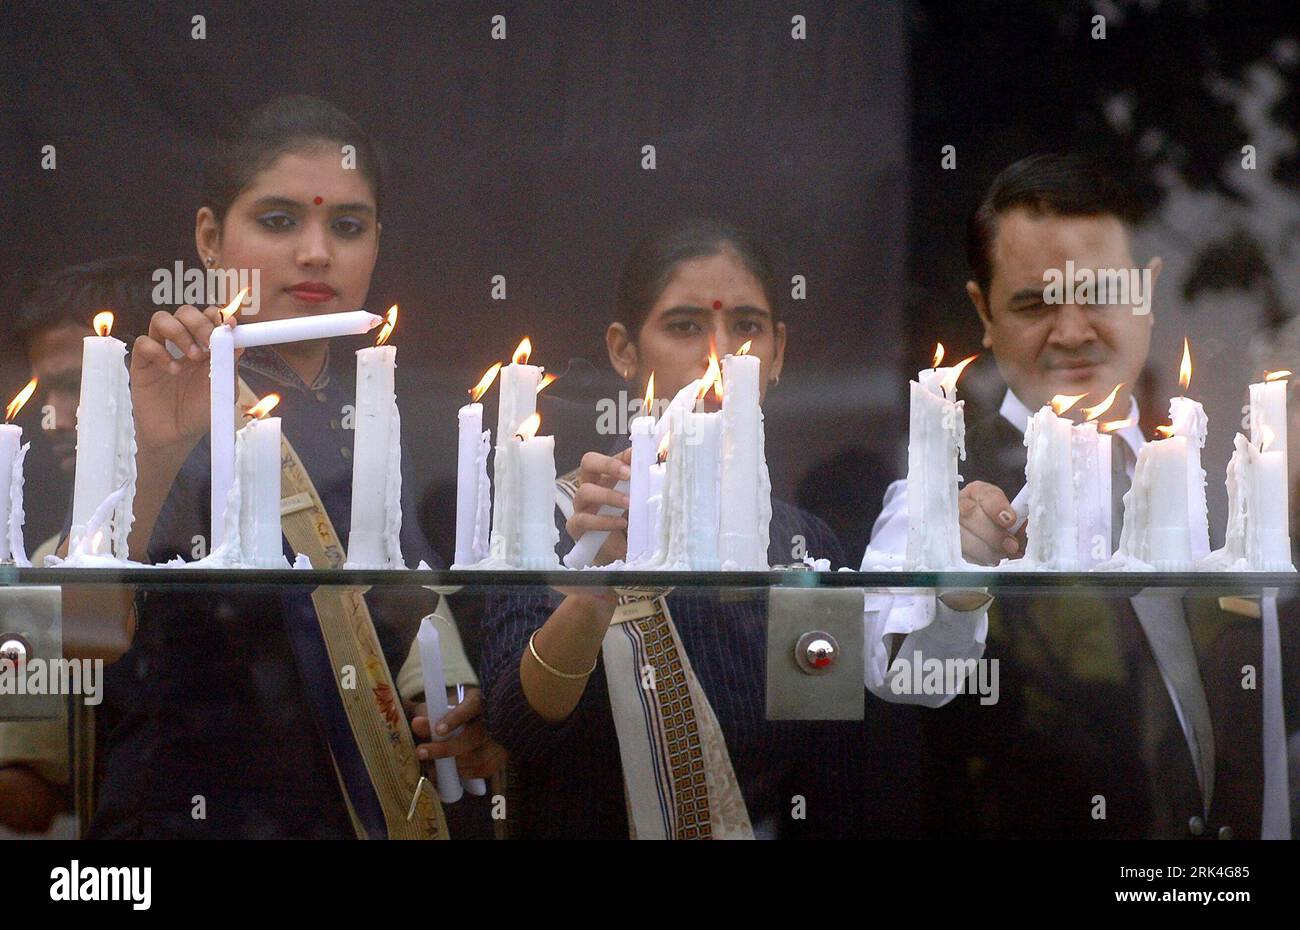 Bildnummer: 53628522  Datum: 26.11.2009  Copyright: imago/Xinhua (091126) -- MUMBAI, Nov. 26, 2009 (Xinhua) -- Staff members of Oberoi Trident hotel light candles to honor victims in front of Oberoi Trident hotel, one of the sites of last year s terror attacks, in Mumbai city of India, Nov. 26, 2009. India marked the first anniversary of the 2008 terrorist attacks on Mumbai on Thursday. (Xinhua) (zcq) (2)INDIA-MUMBAI-VICTIMS-ANNIVERSARY PUBLICATIONxNOTxINxCHN Trauer Gedenken Opfer Mumbai Jahrestag kbdig xcb 2009 quer o0 Kerze    Bildnummer 53628522 Date 26 11 2009 Copyright Imago XINHUA  Mumba Stock Photo